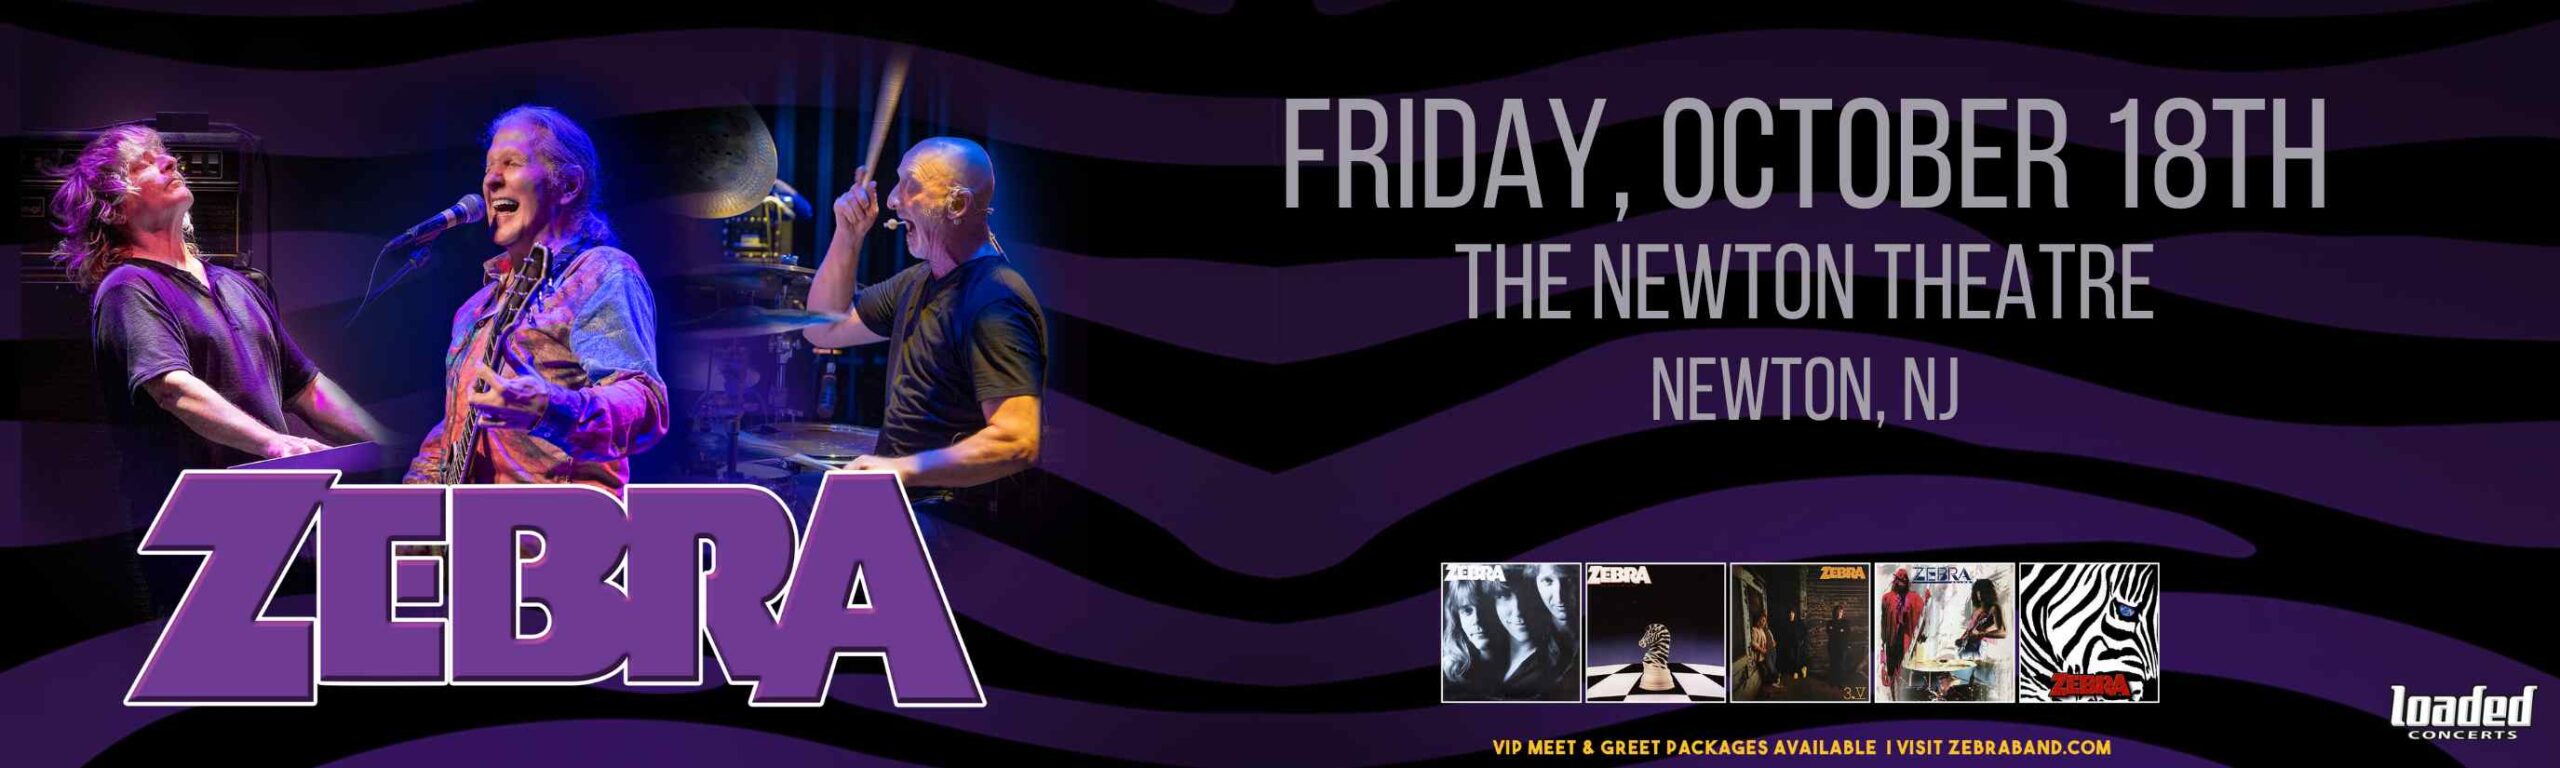 Zebra comes to The Newton Theatre on Friday, October 18th.